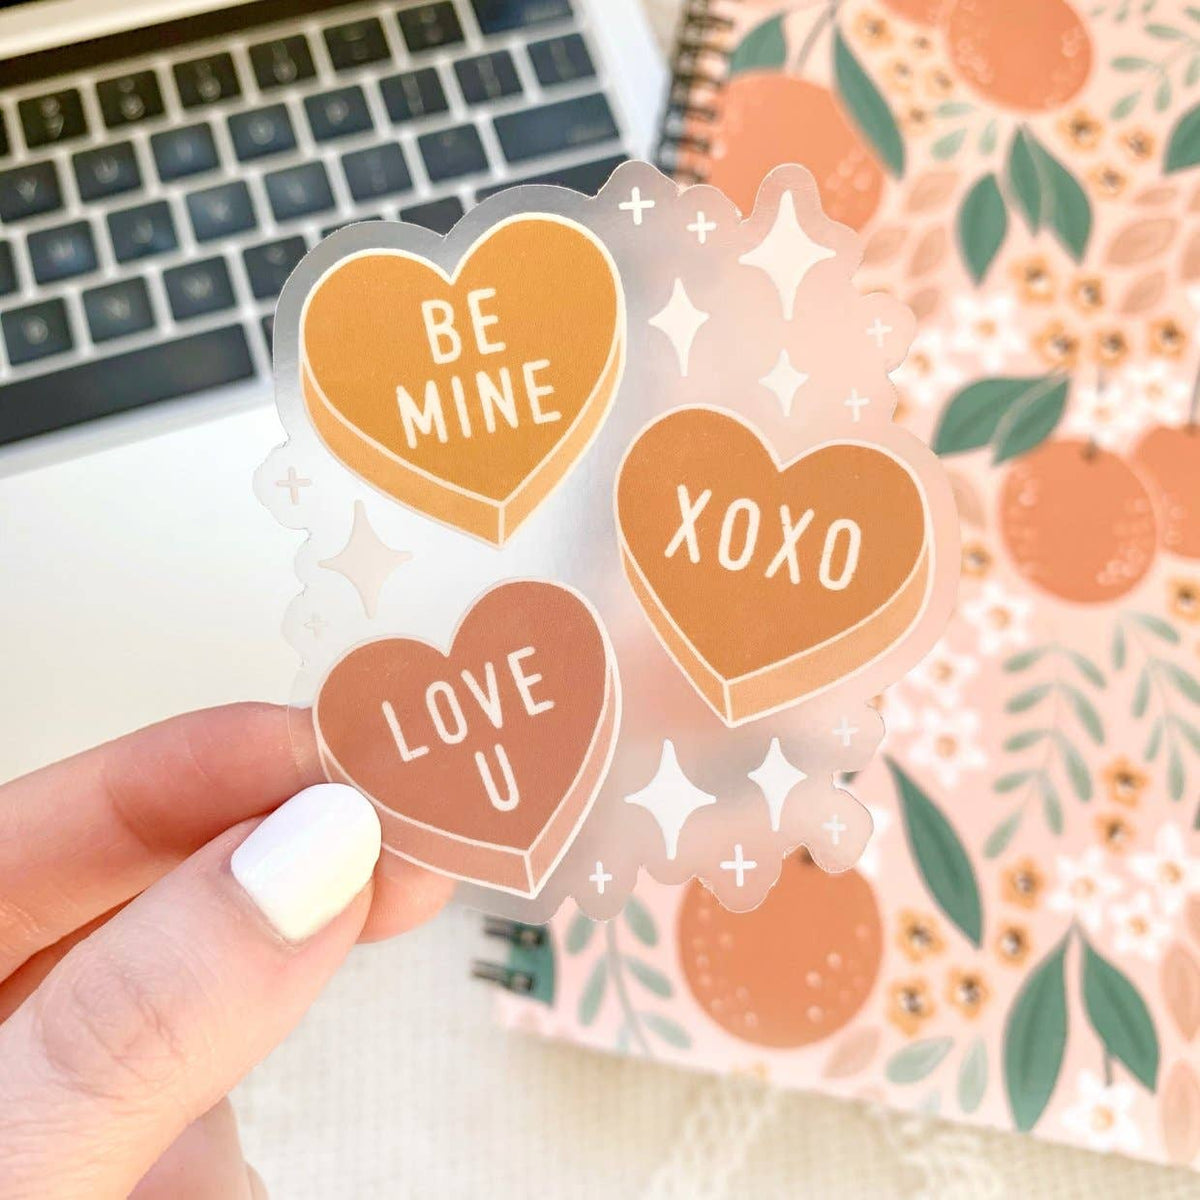 Clear sticker with rust and rose colored valentine's candy hearts and white diamonds. Hearts say "Be Mine", "Love U", and "XOXO"